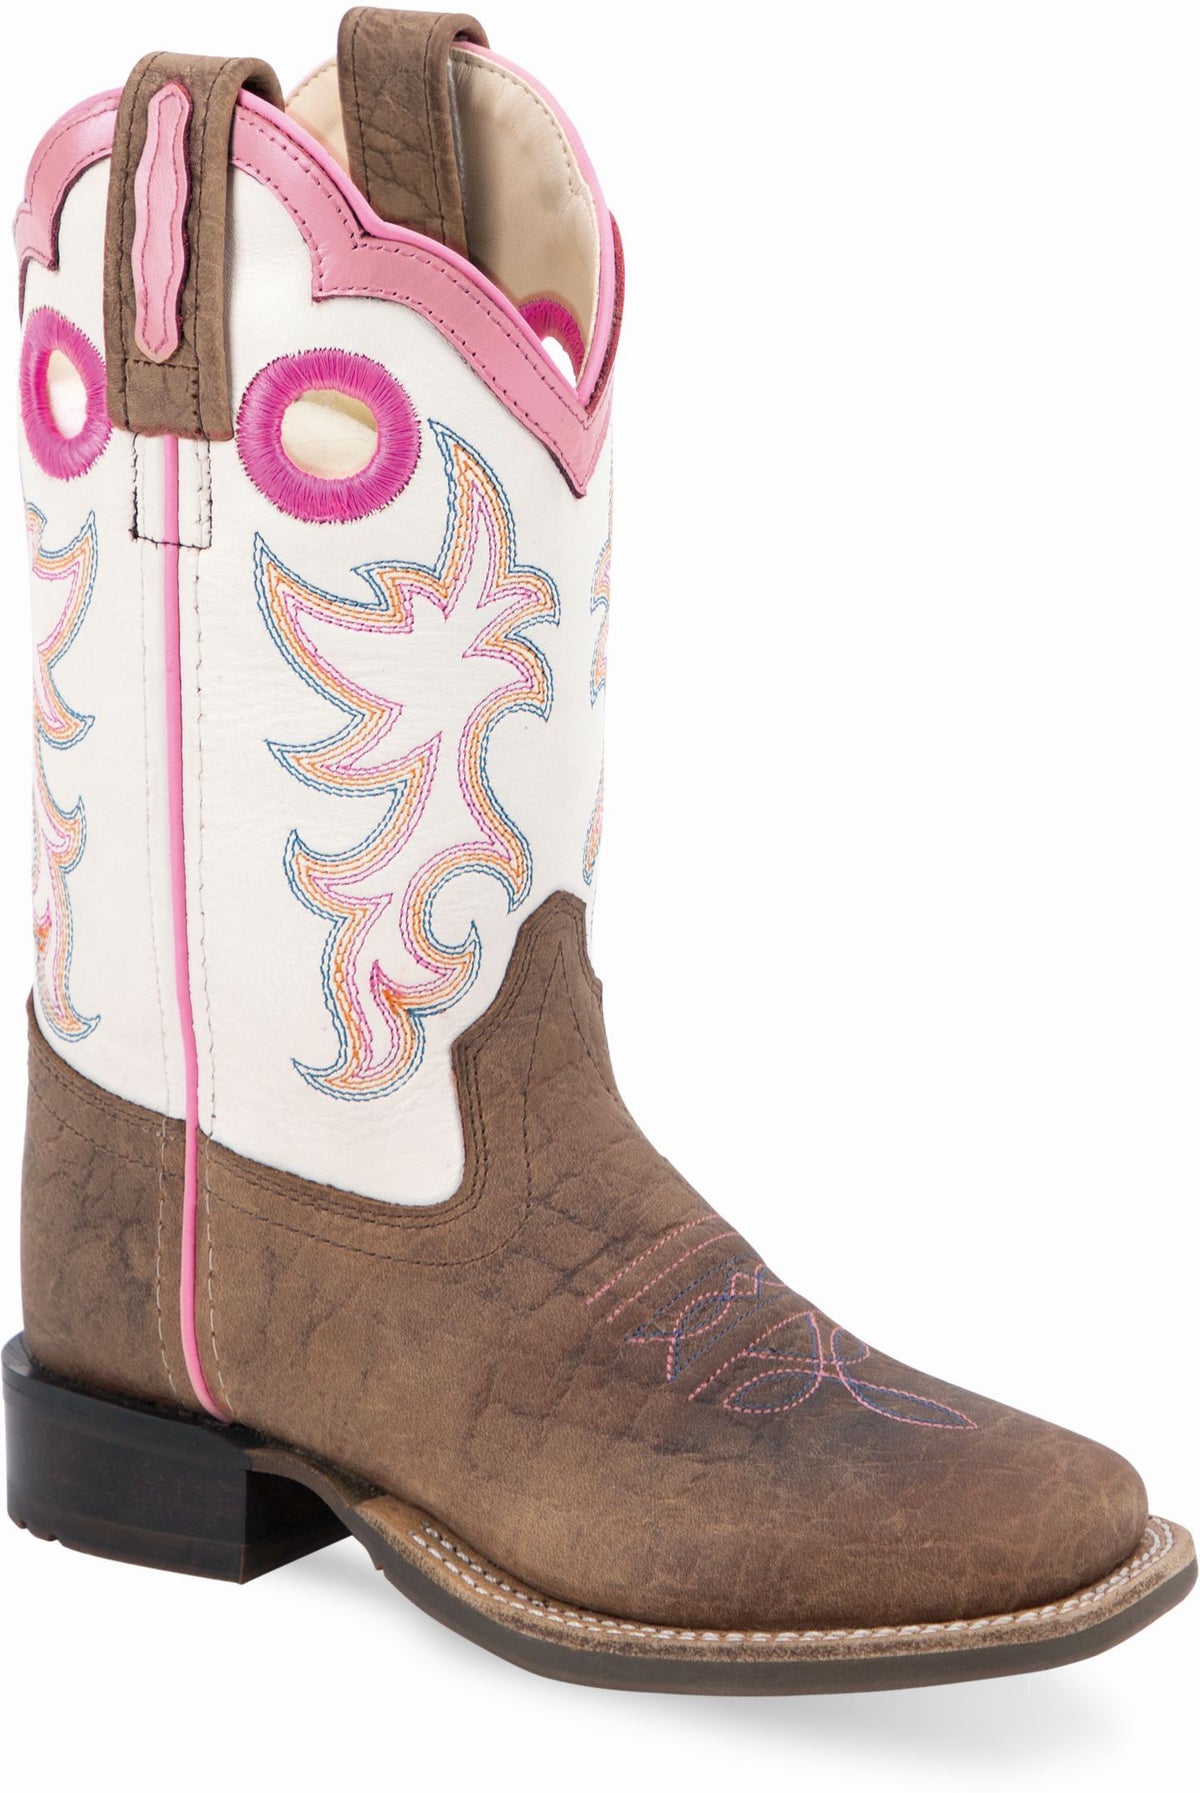 Old West Brown Bull Hide Print Foot White Shaft with Pink Collar Children's Broad Square Toe Boots